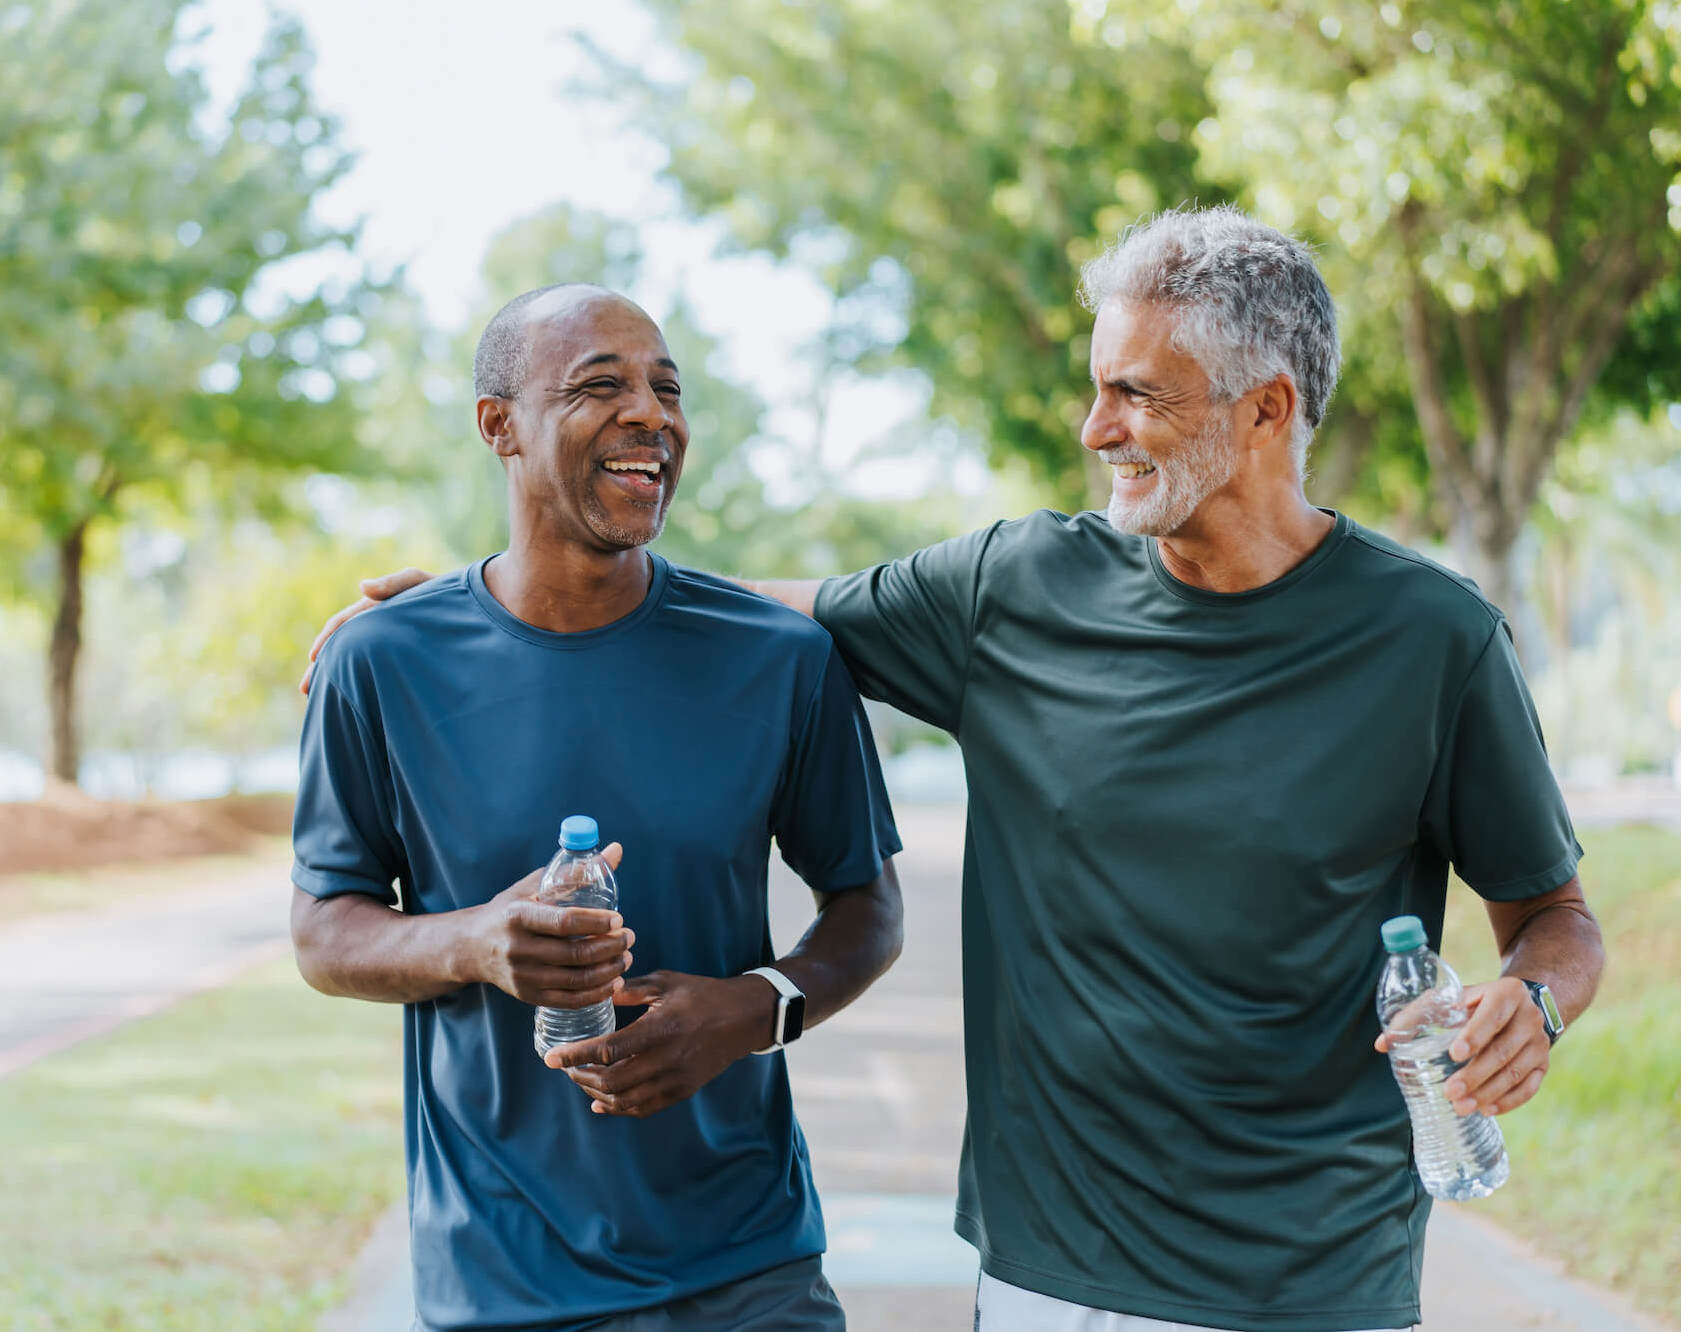 prioritize preventive care and early intervention for men aged 50-65